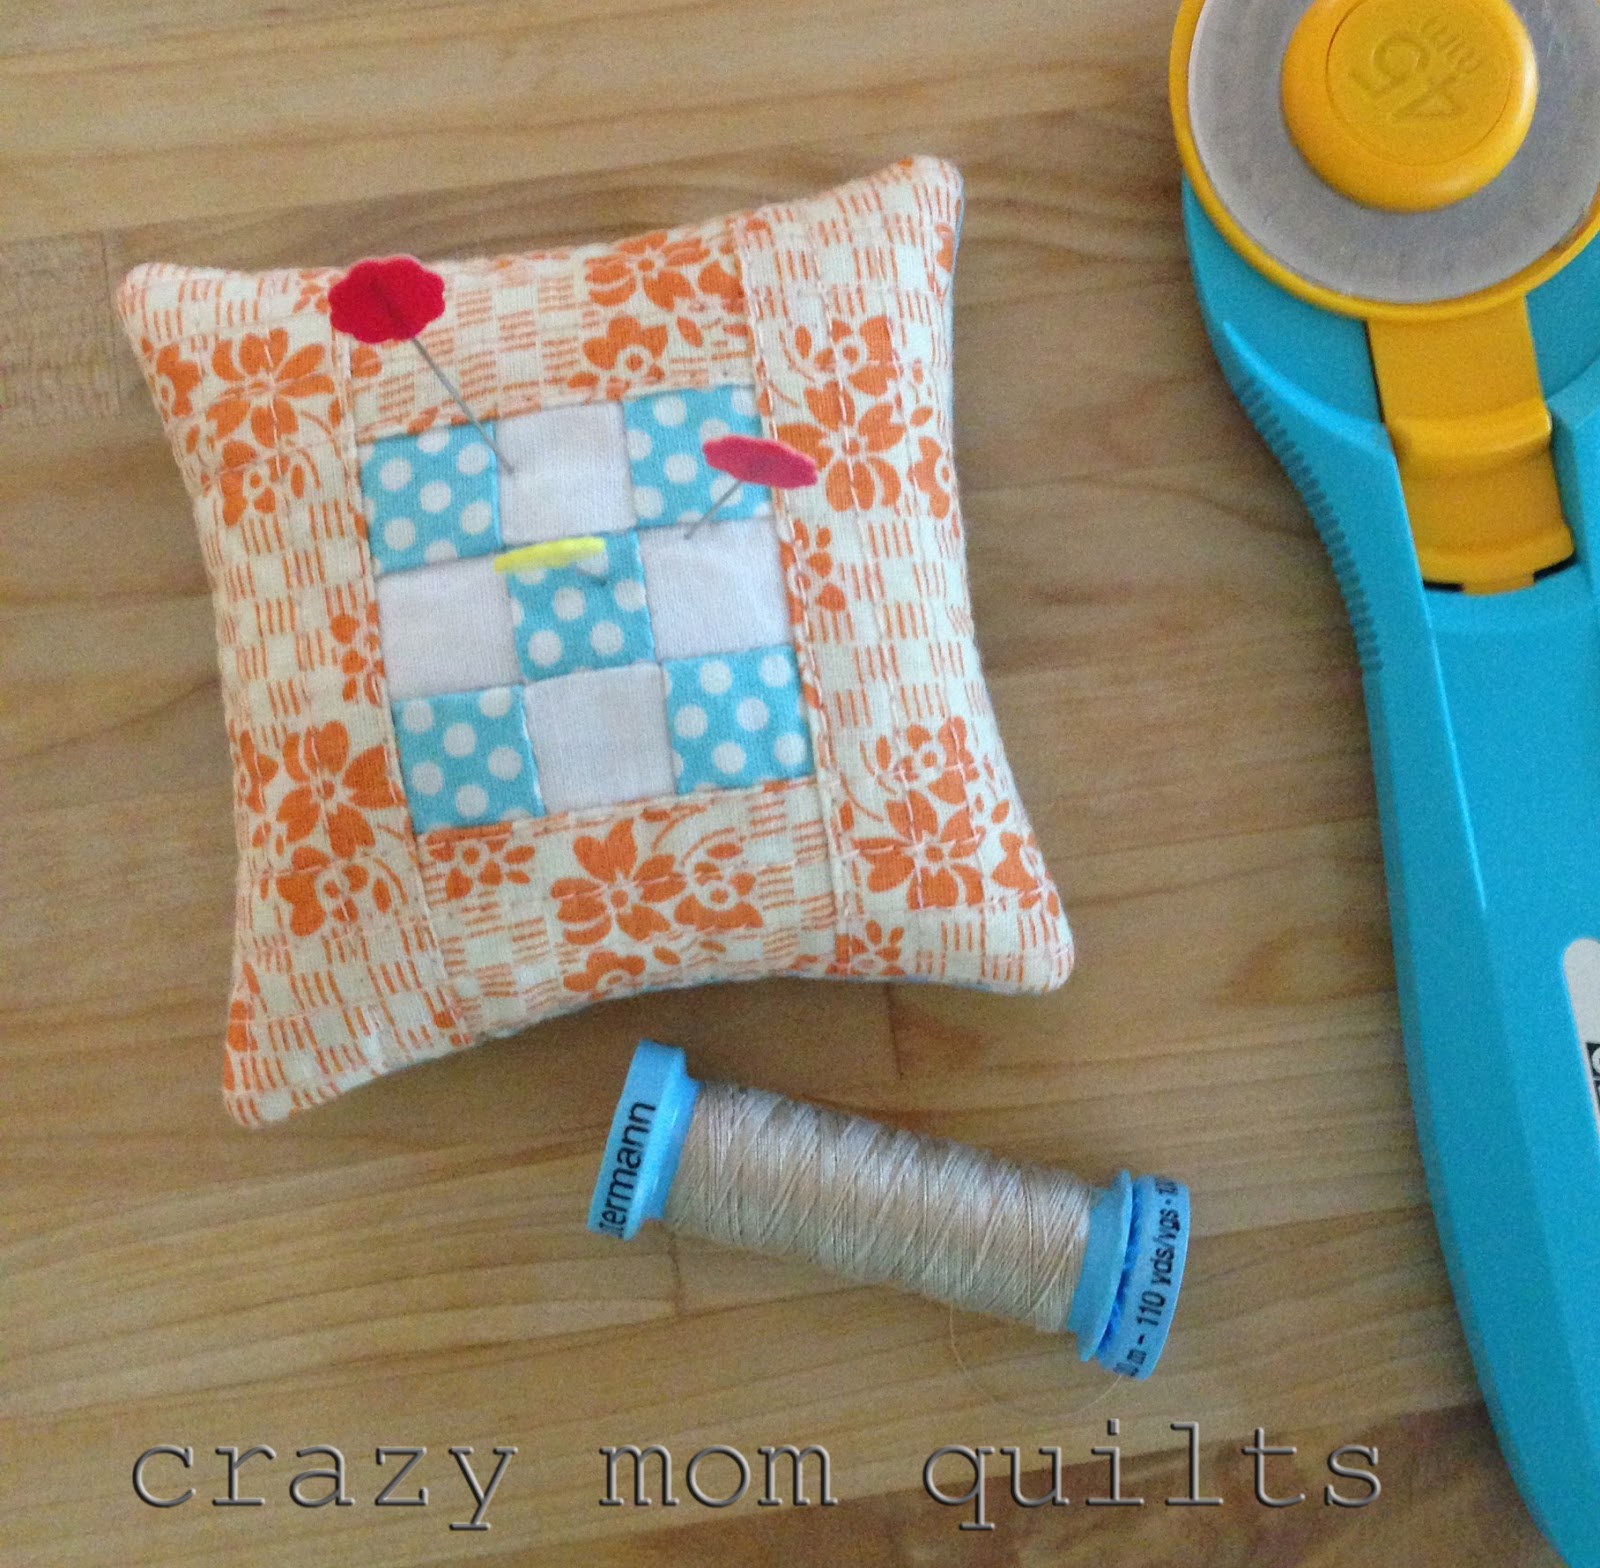 crazy mom quilts: mini 9 patch pin cushion tutorial